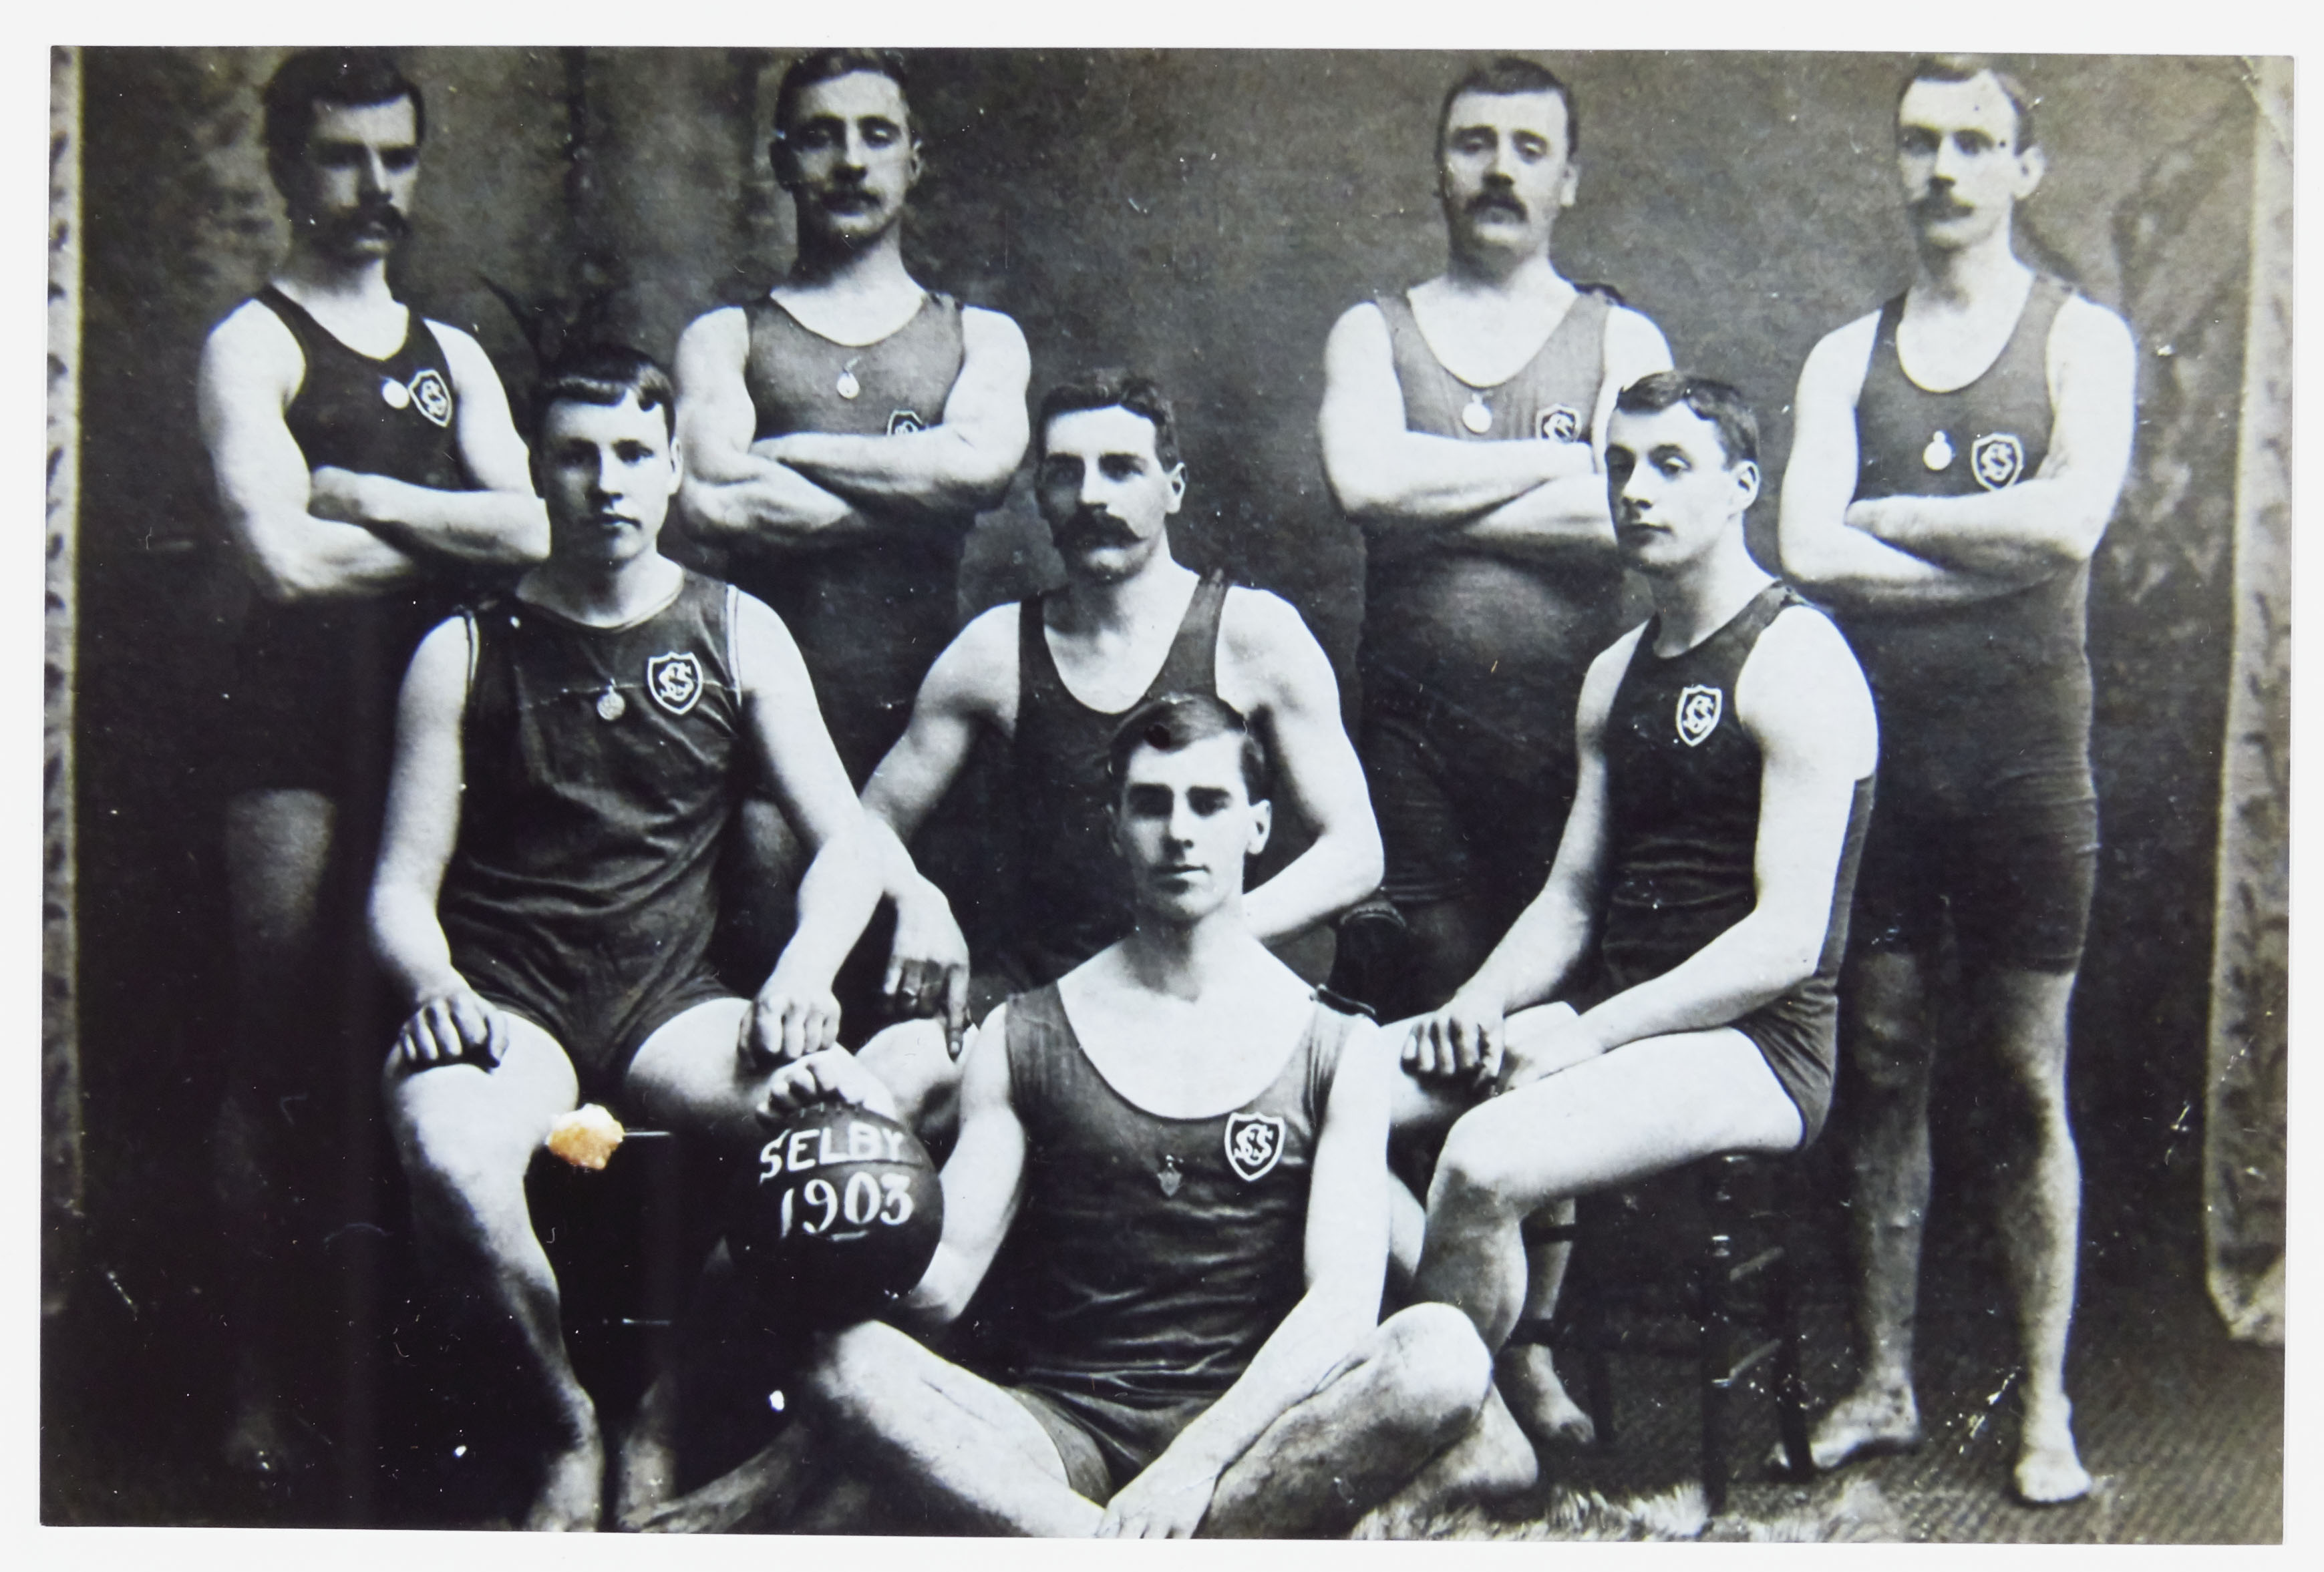 Members of Selby Swimming Club in 1903. 